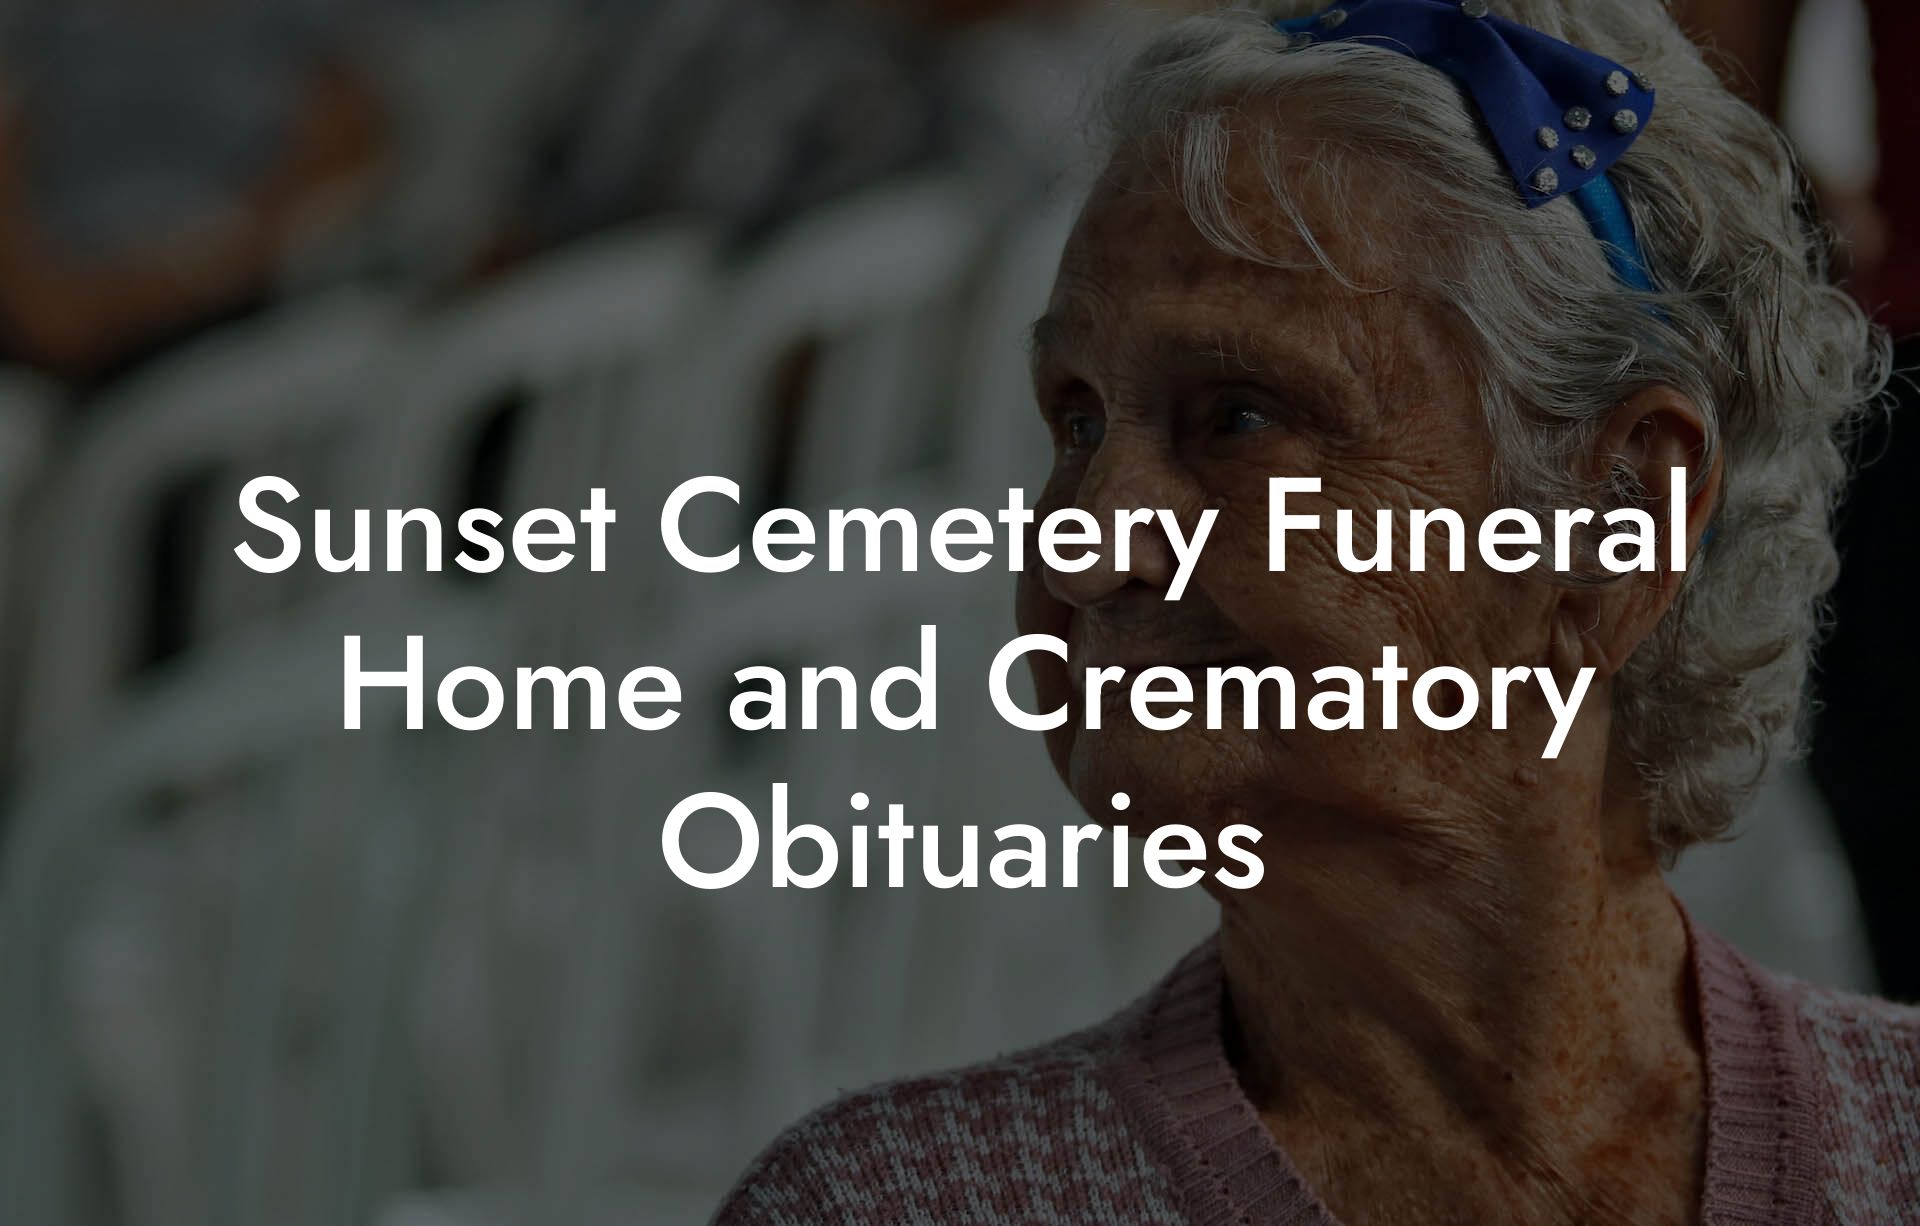 Sunset Cemetery Funeral Home and Crematory Obituaries